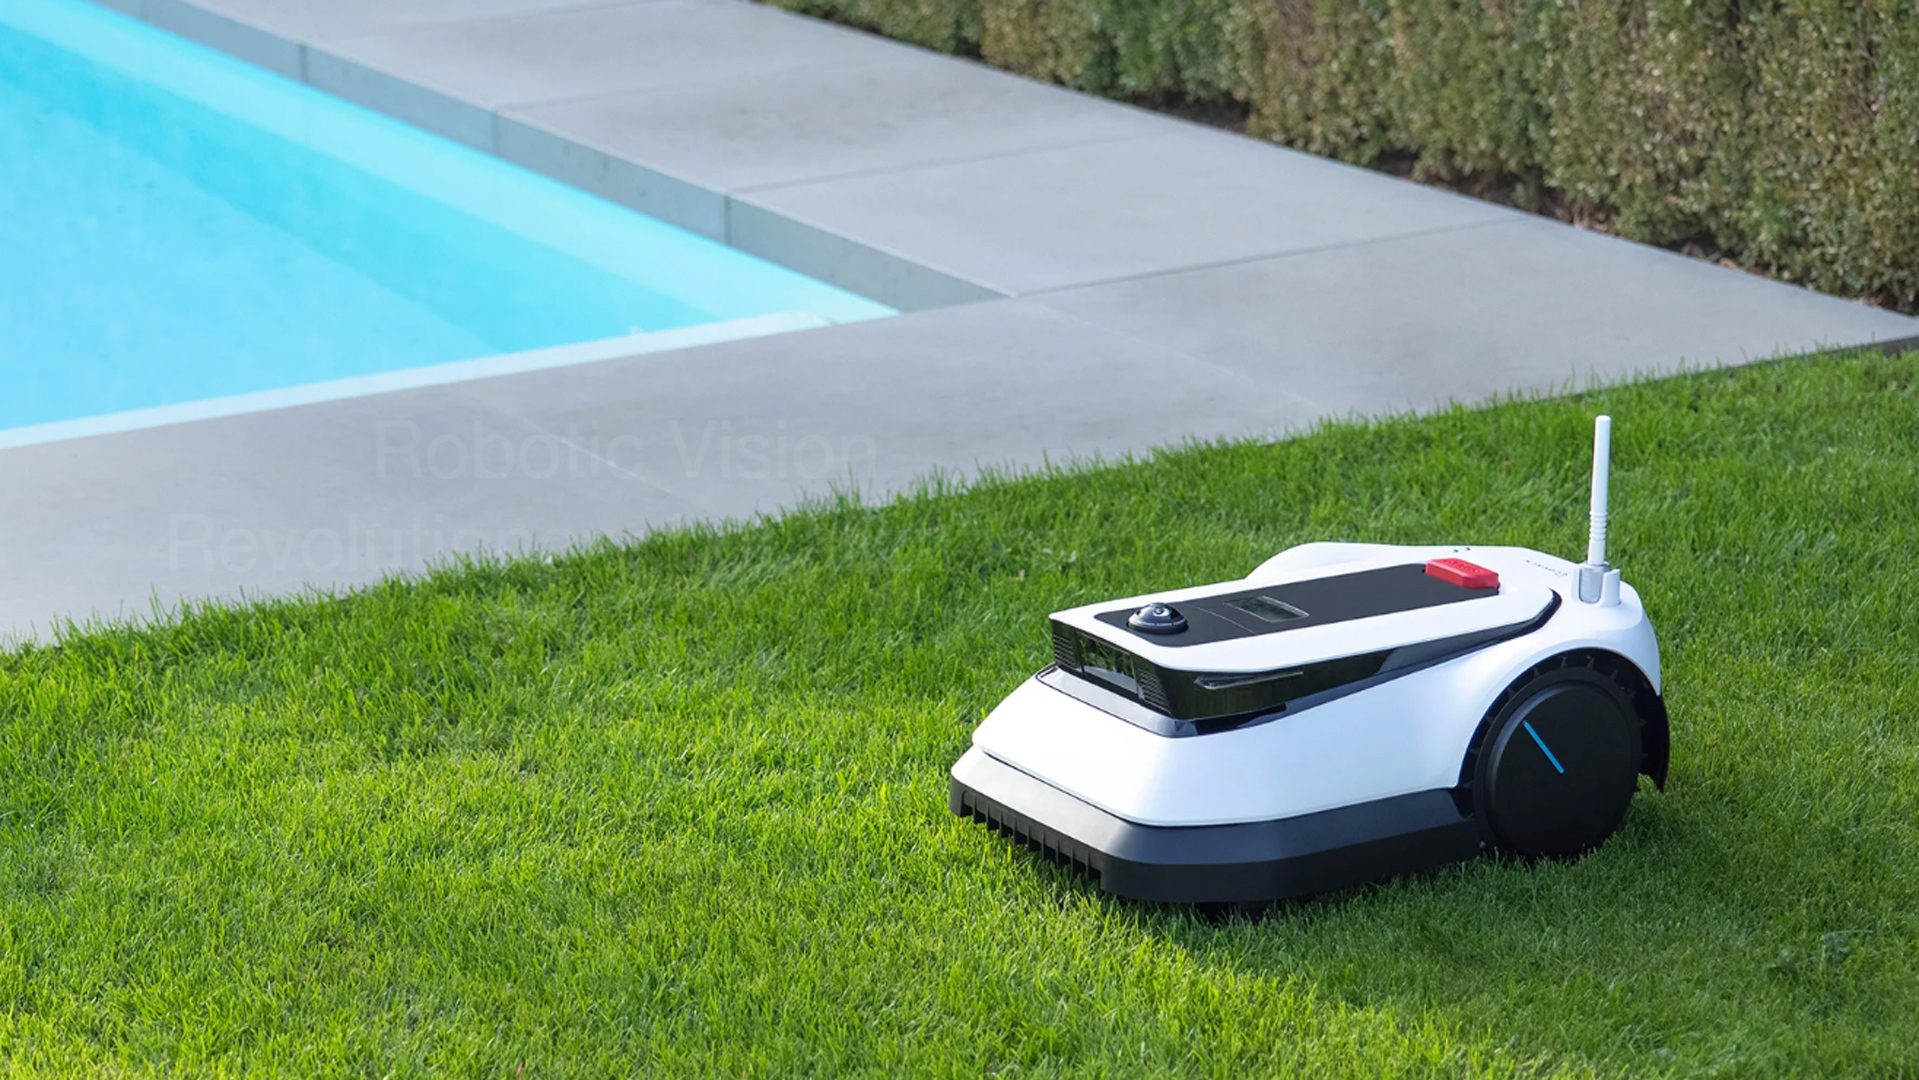 identifikation forkorte blanding Ecovacs launches Goat G1 robotic lawn mower that relies on cameras and GPS  | NextPit